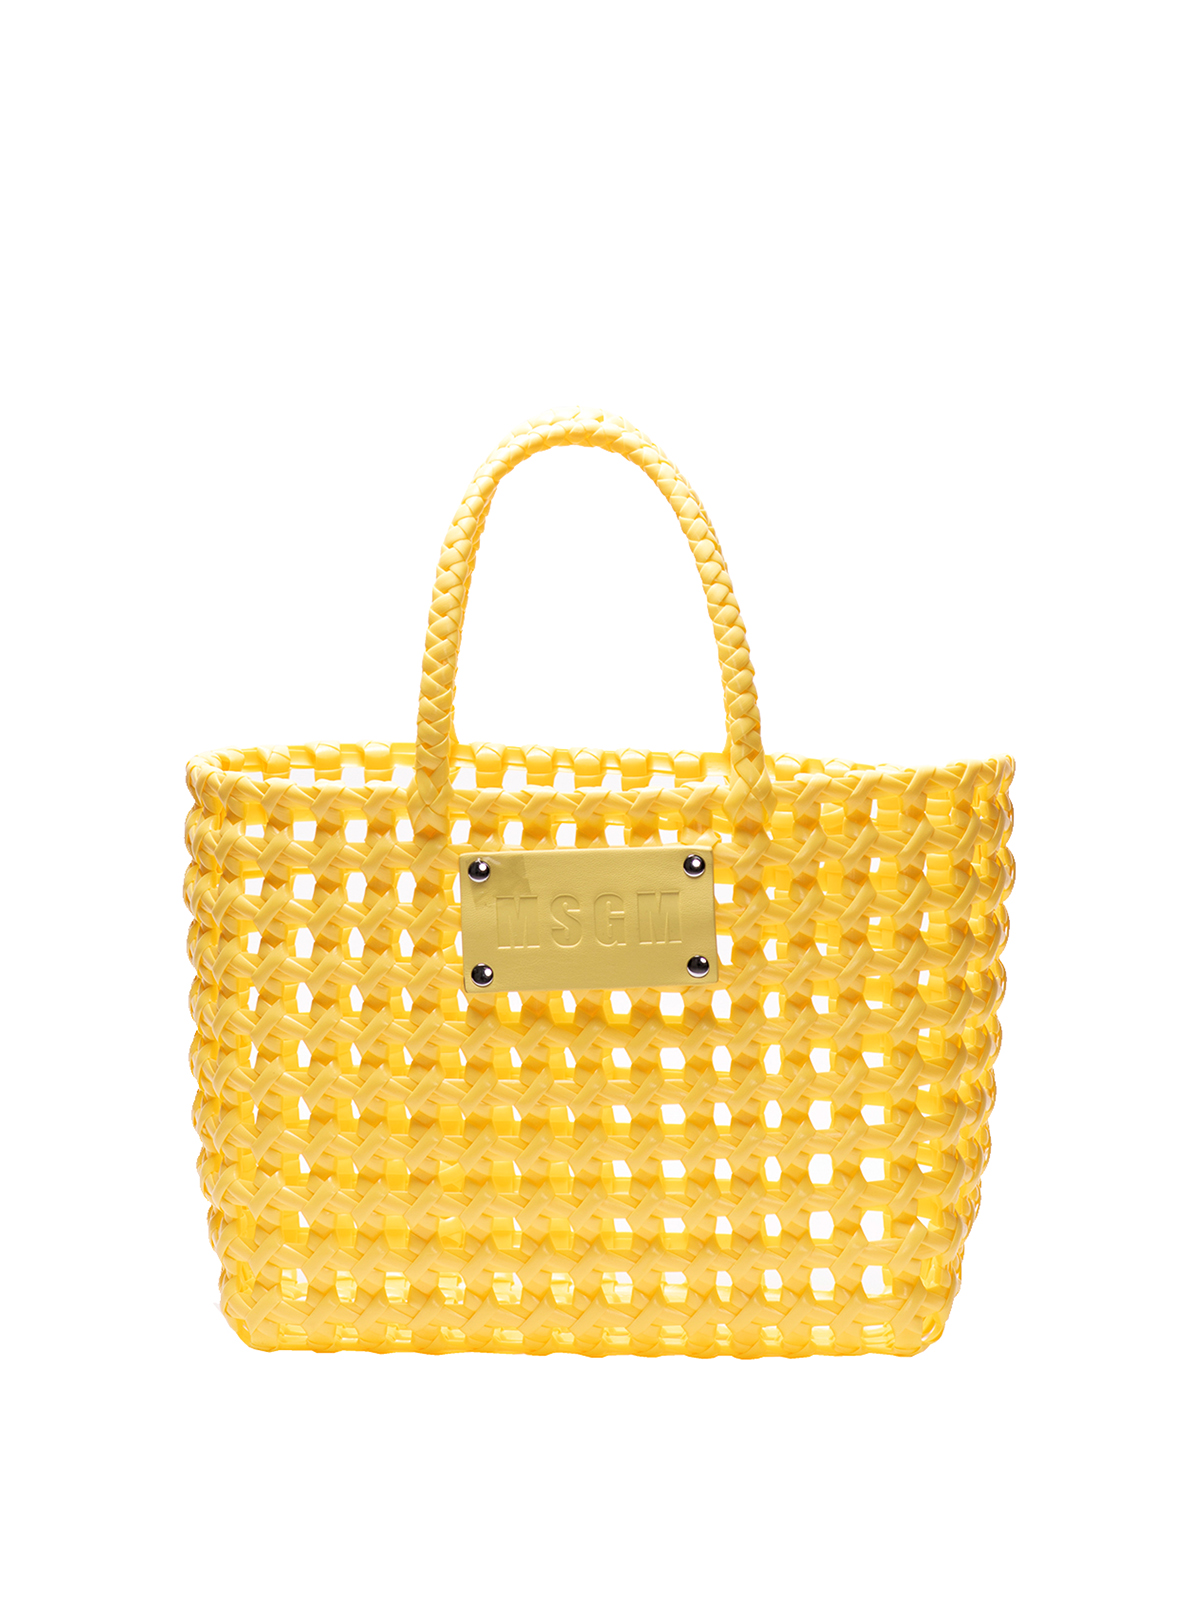 Msgm Net Bag Pm In Yellow